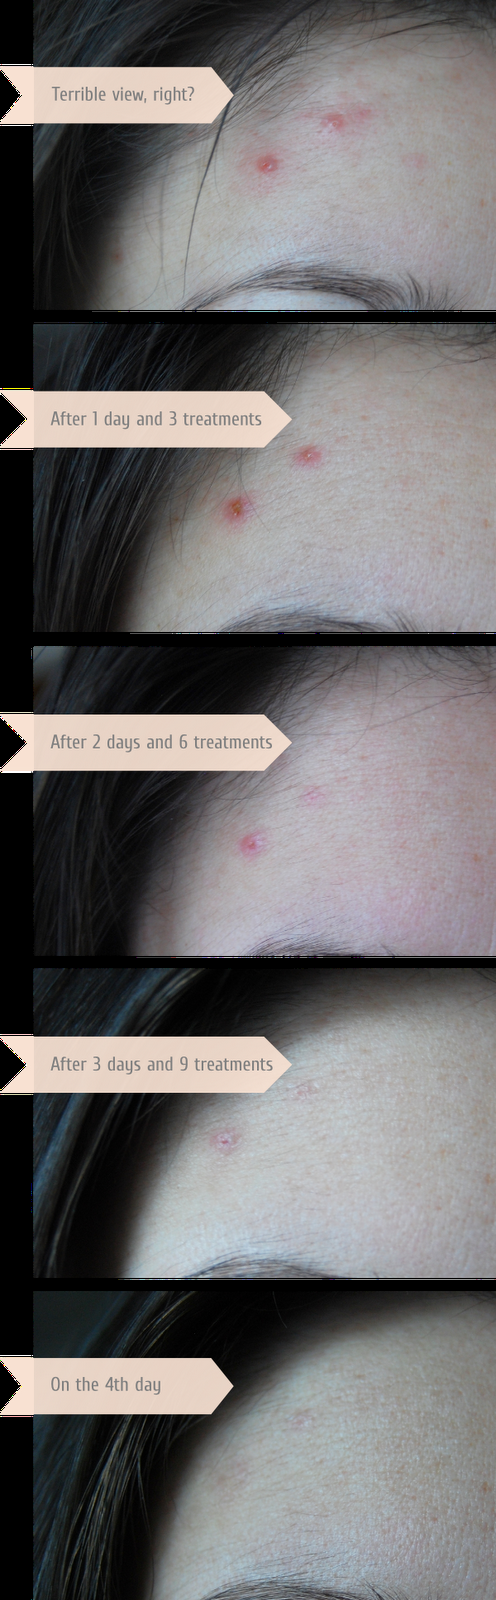 How to treat acne in 4 days with the help of banana peels?